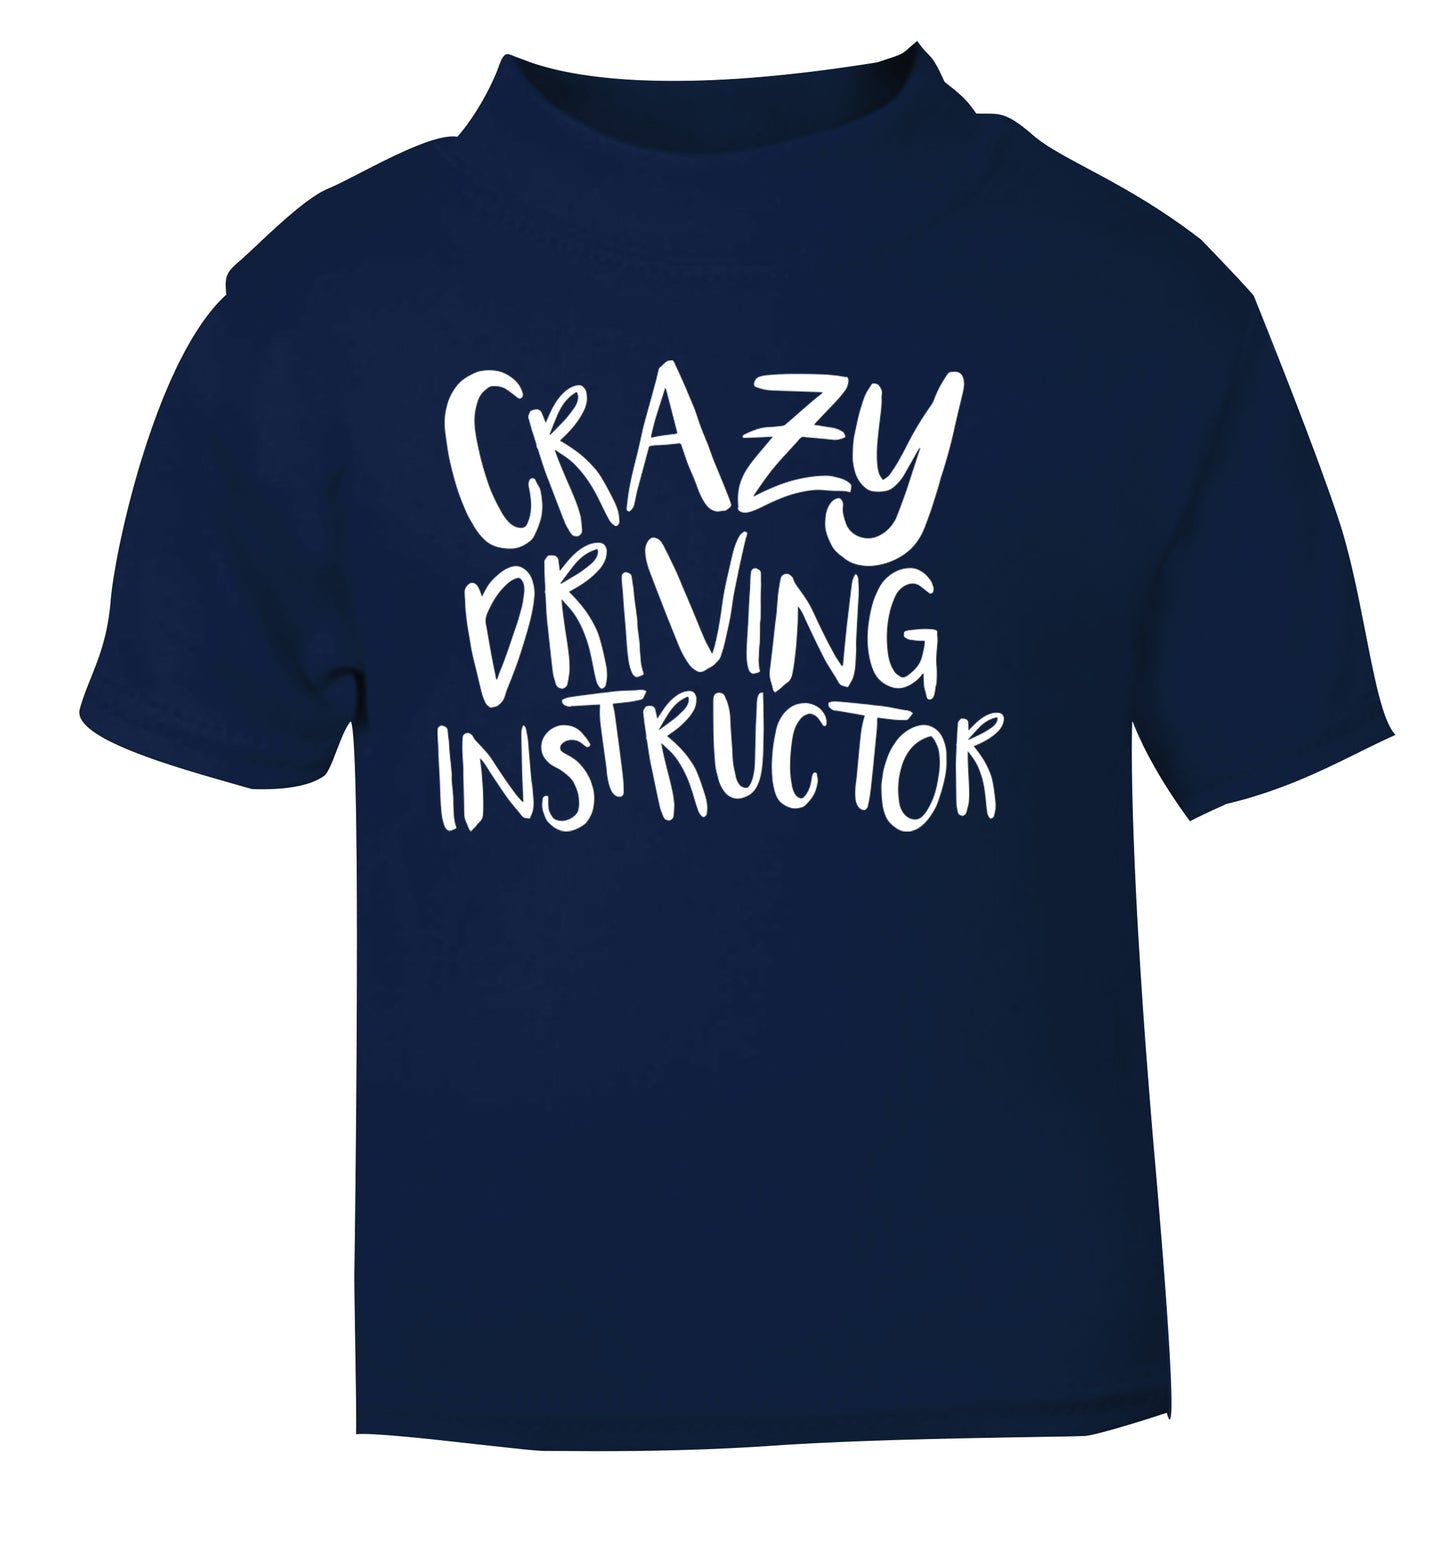 Crazy driving instructor navy Baby Toddler Tshirt 2 Years